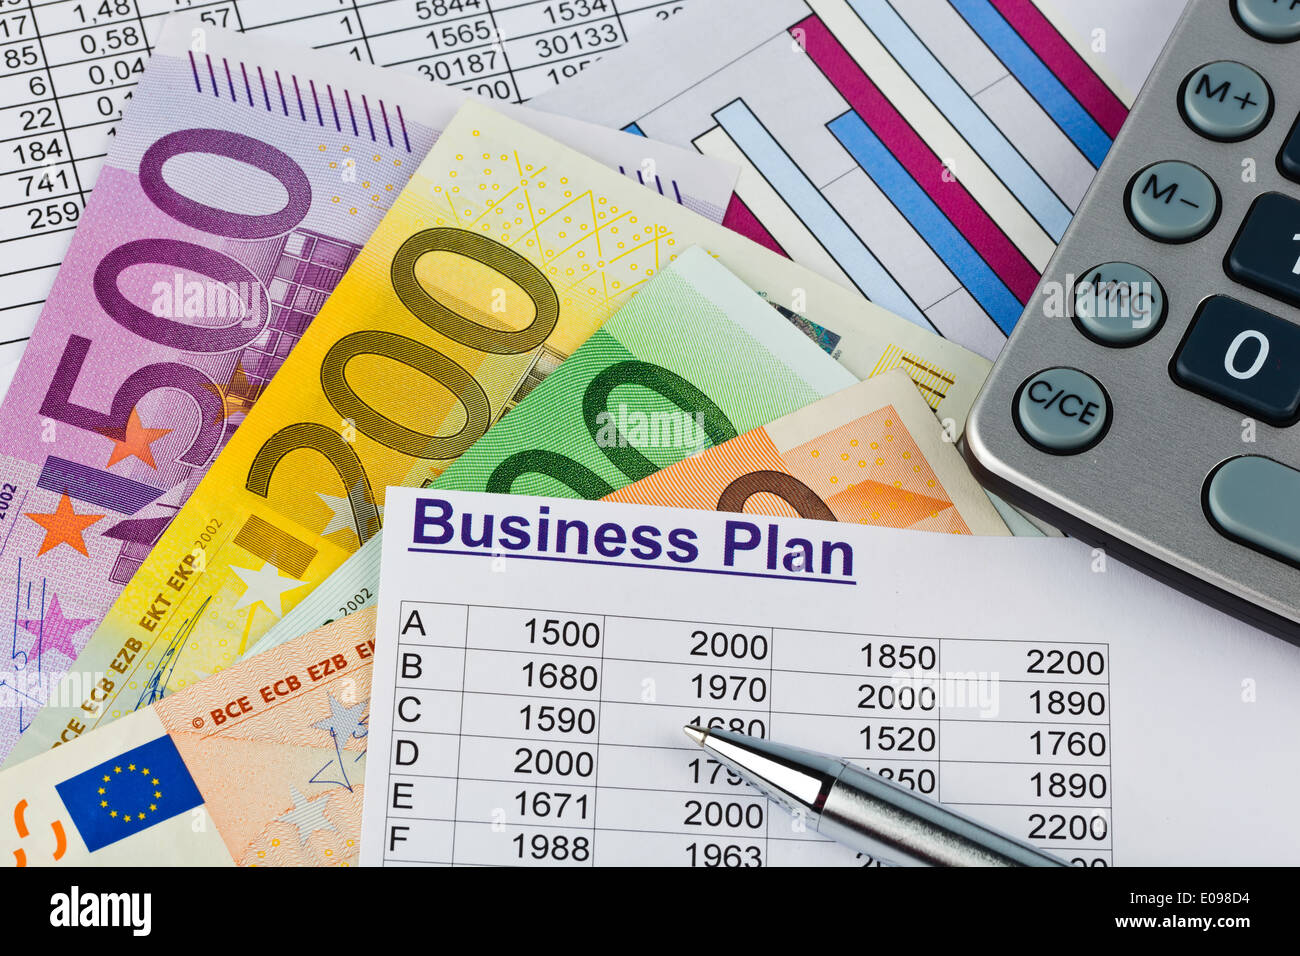 A business plan Stock Photo